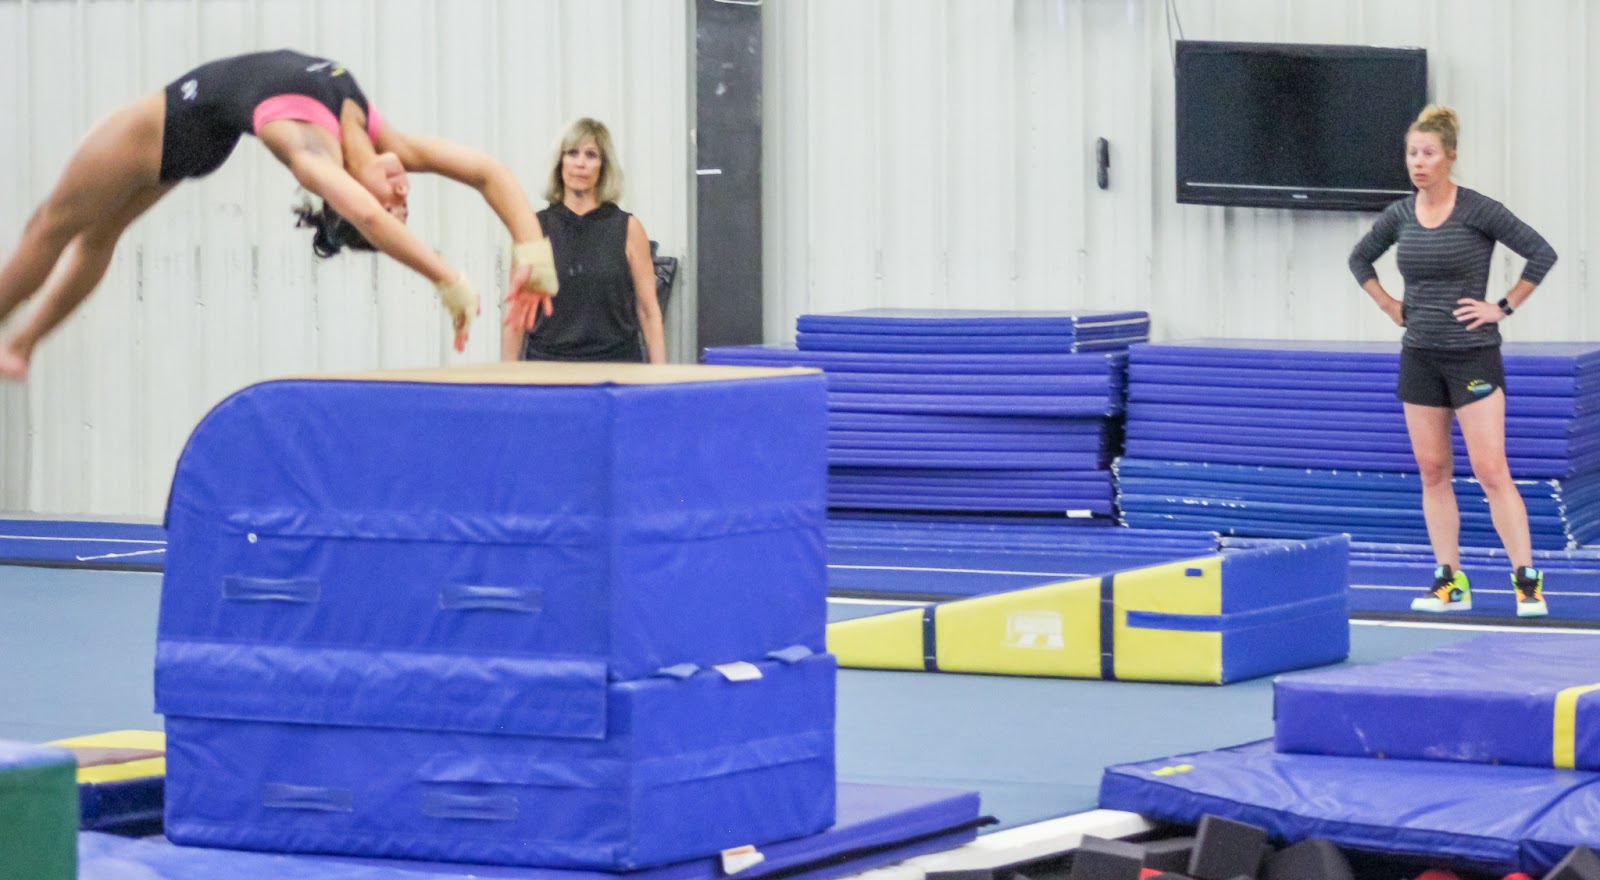 Fuchs and her coaches give special attention to every student at Eagles Gymnastics & Dance Centre.